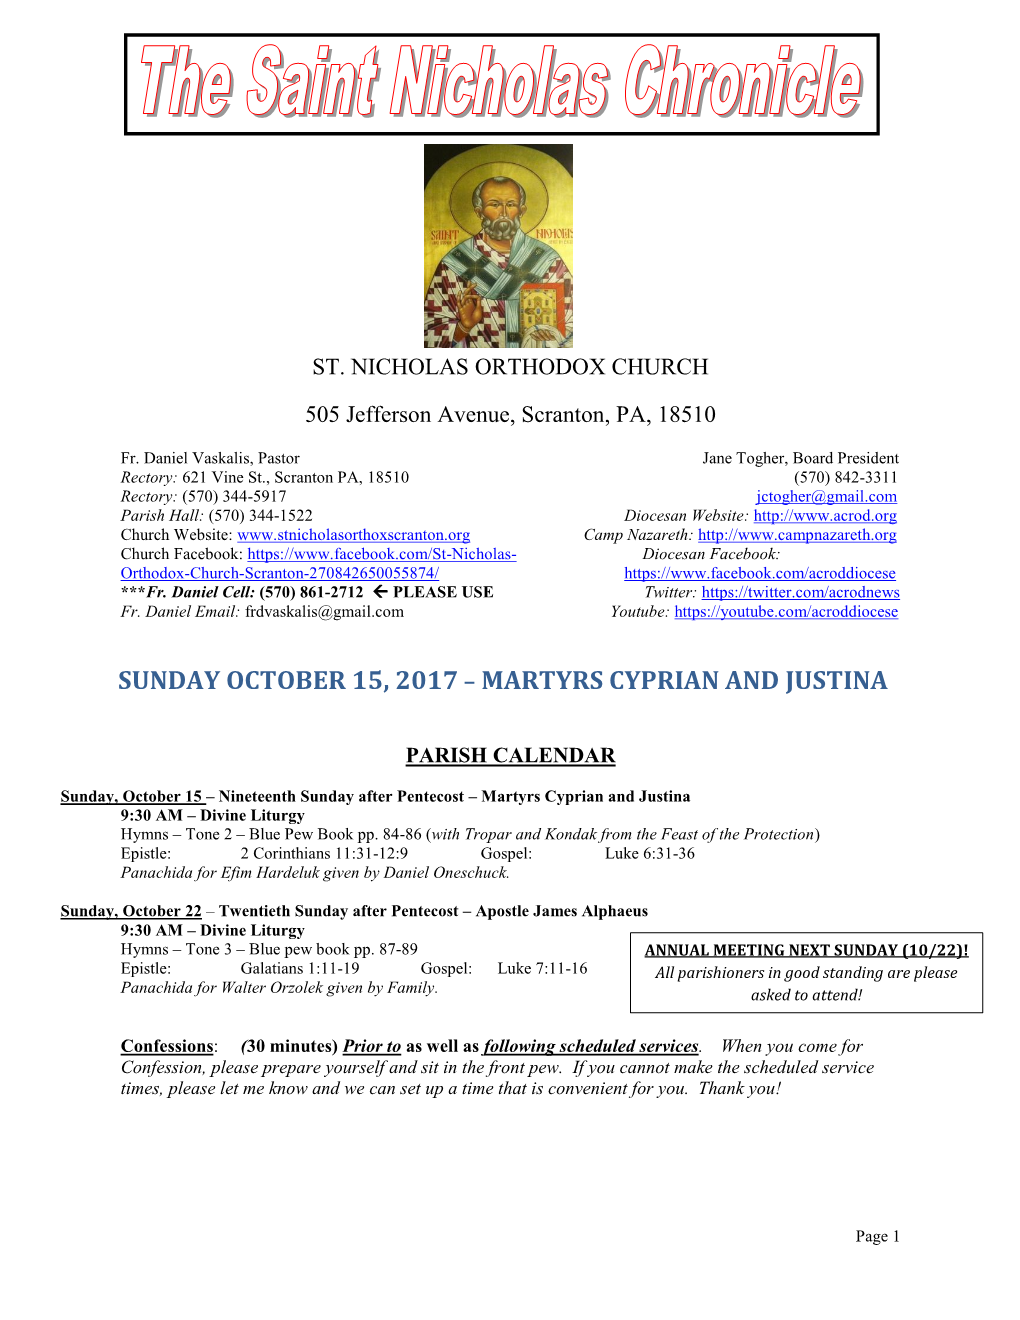 Sunday October 15, 2017 – Martyrs Cyprian and Justina